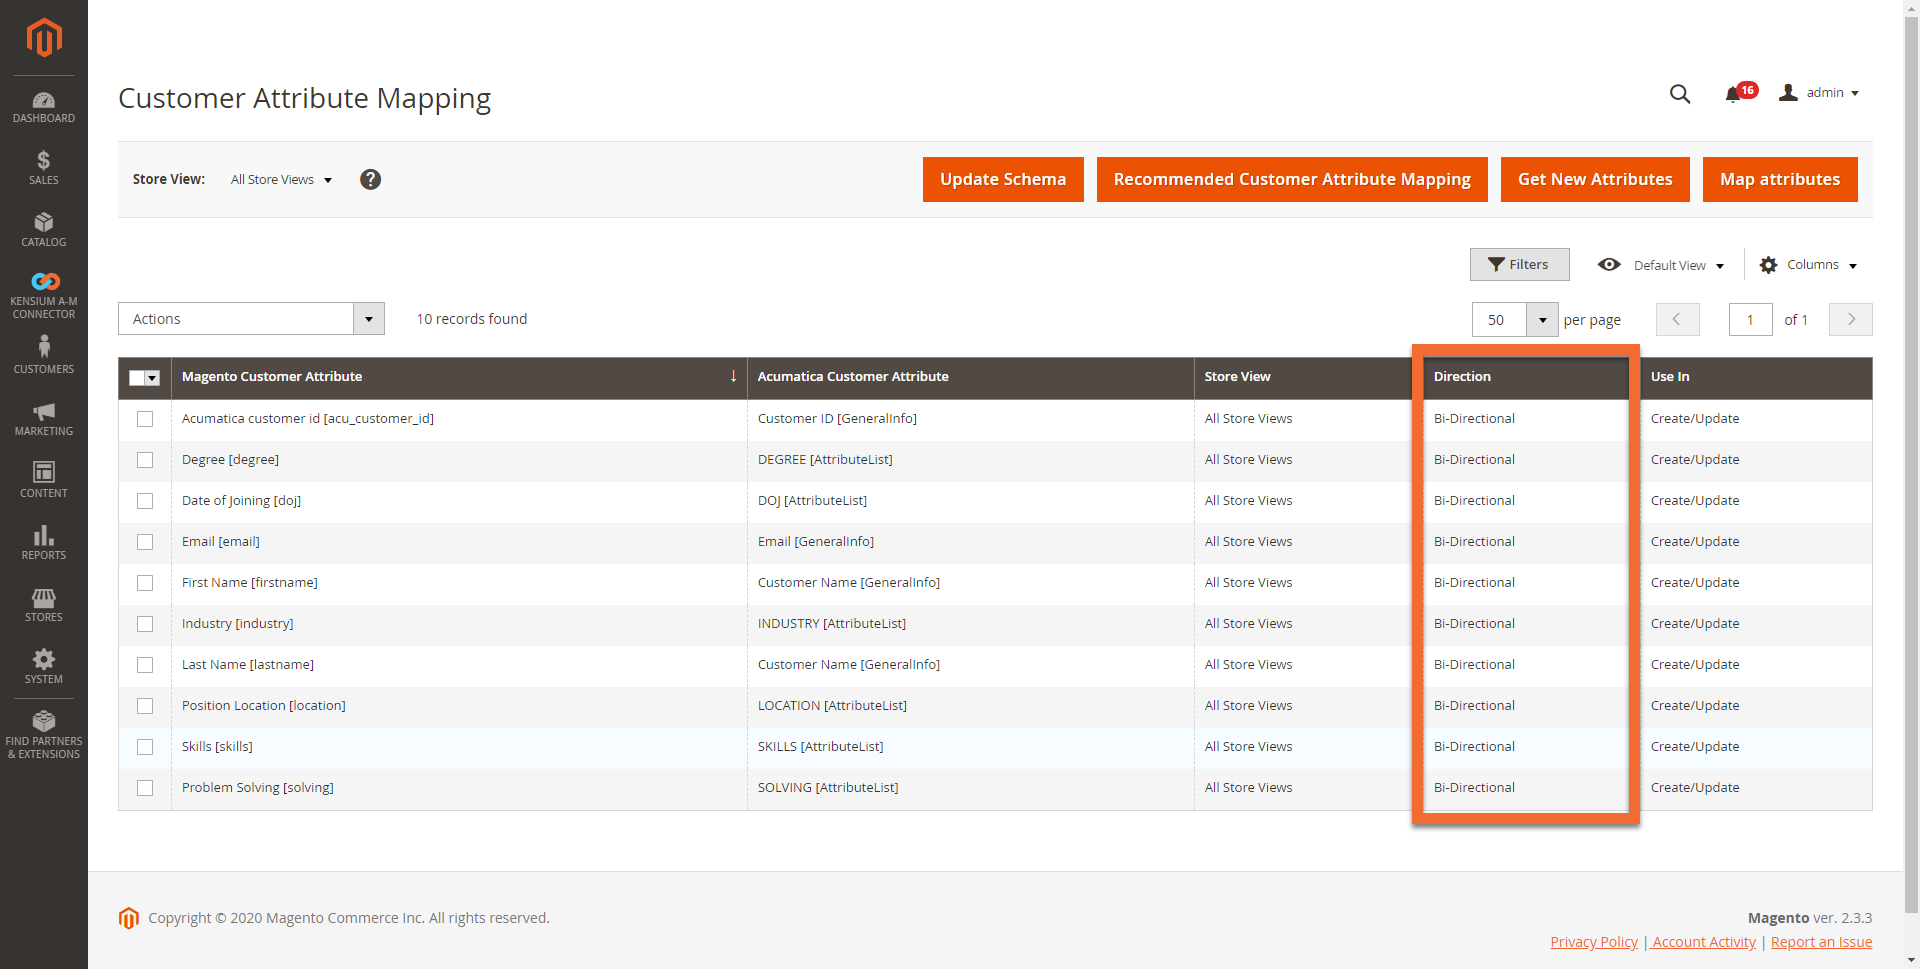 Customer Attribute Mapping Screen in Magento